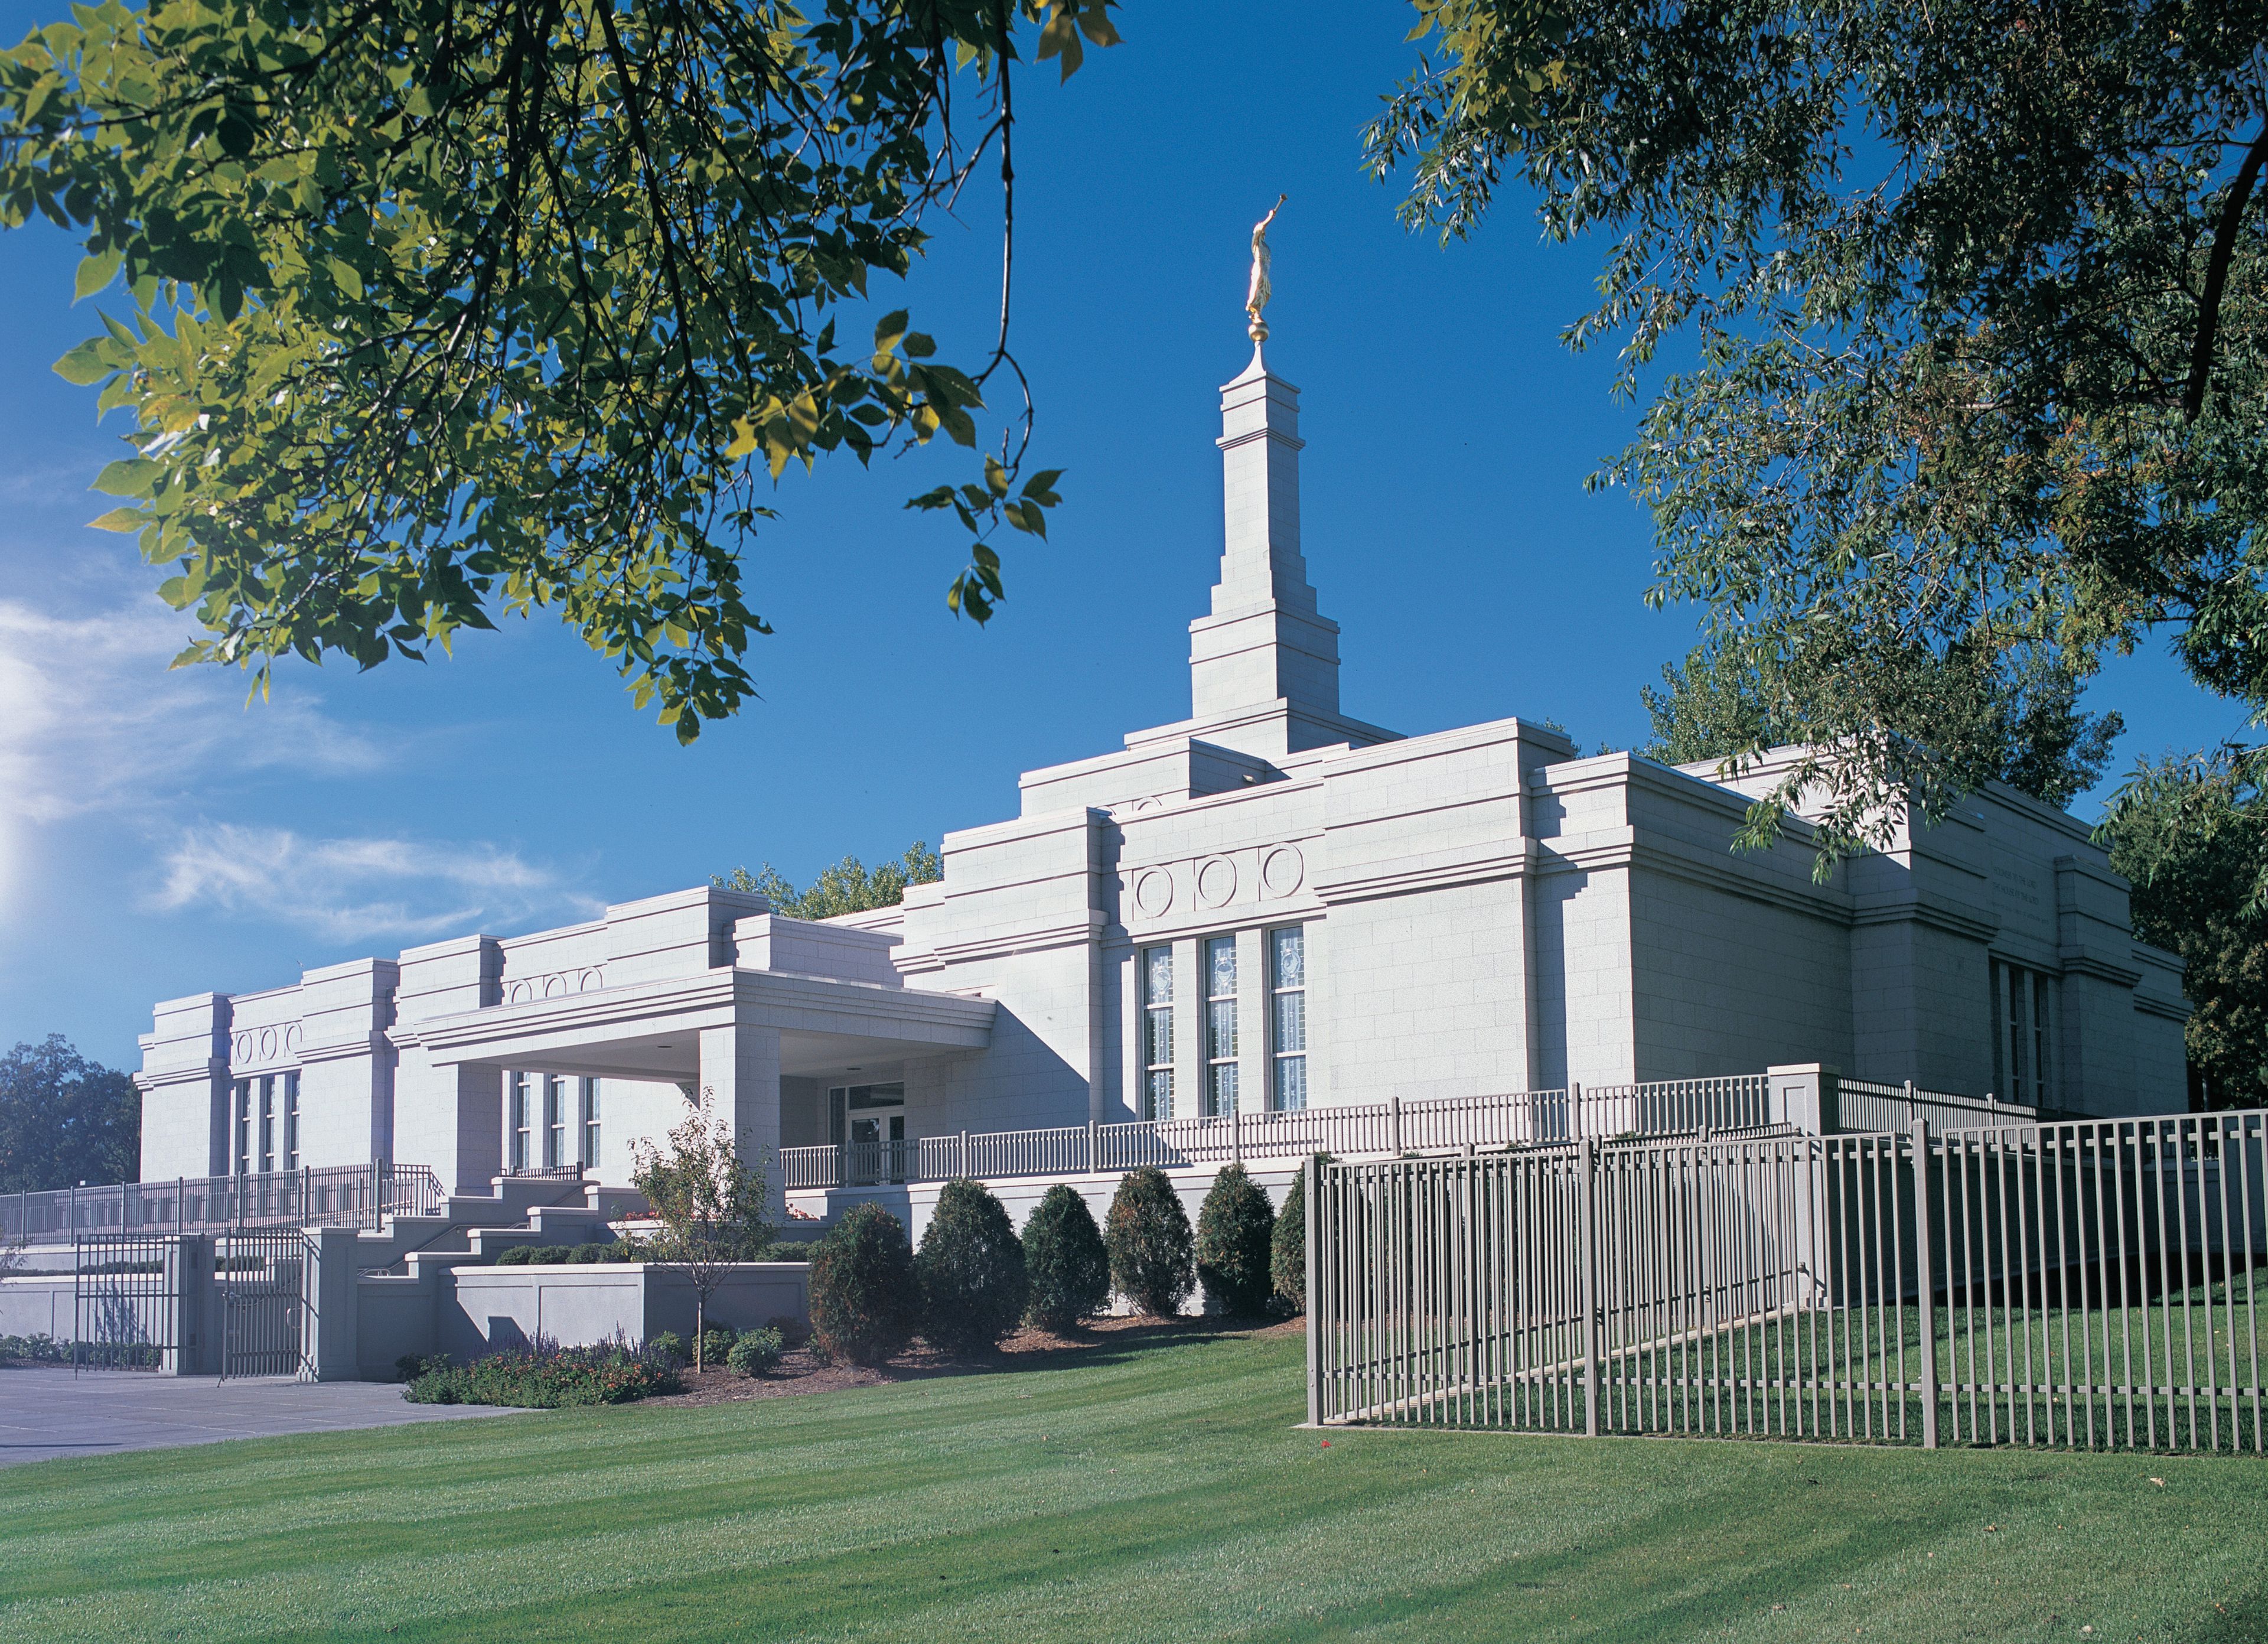 The St. Paul Minnesota Temple and lawn on a sunny day.